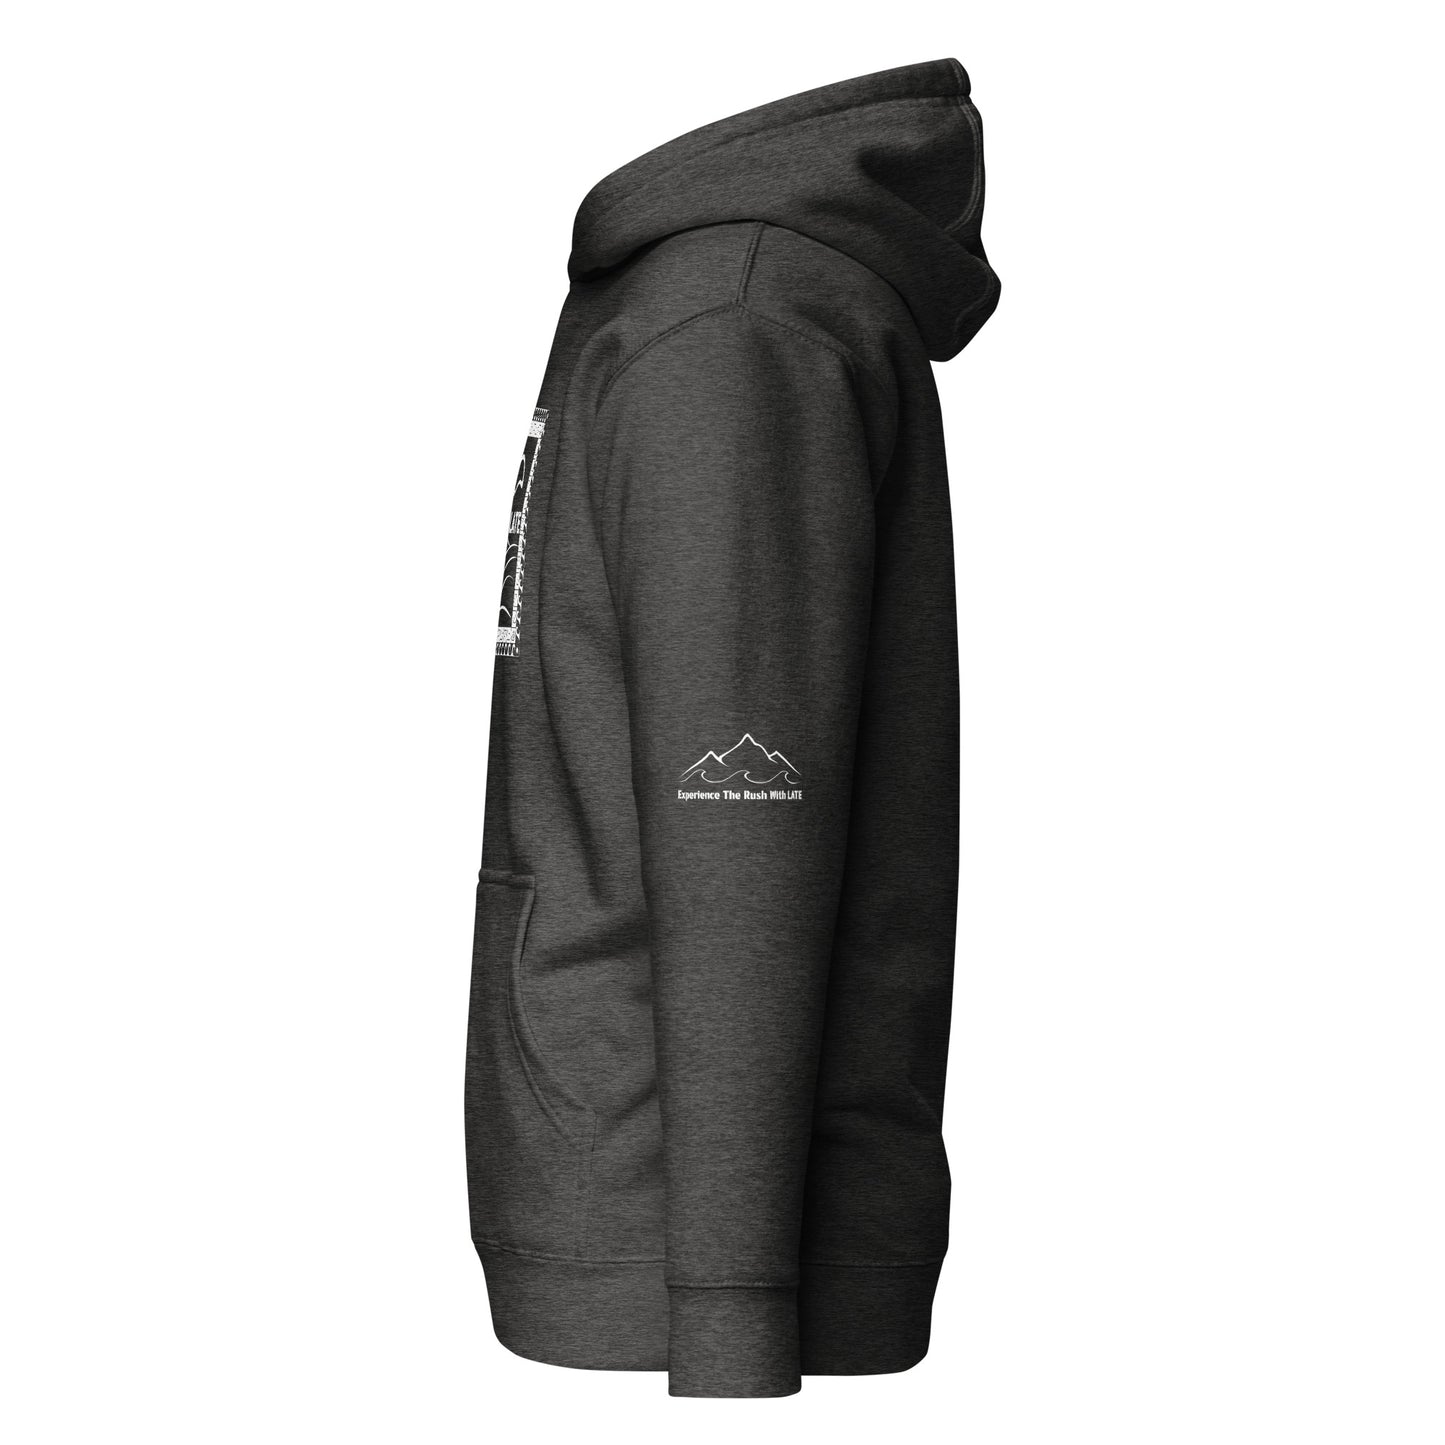 Hoodie tricky wave charcoal heather vague et sommets sur la manche gauche. Experience the rush with Late.